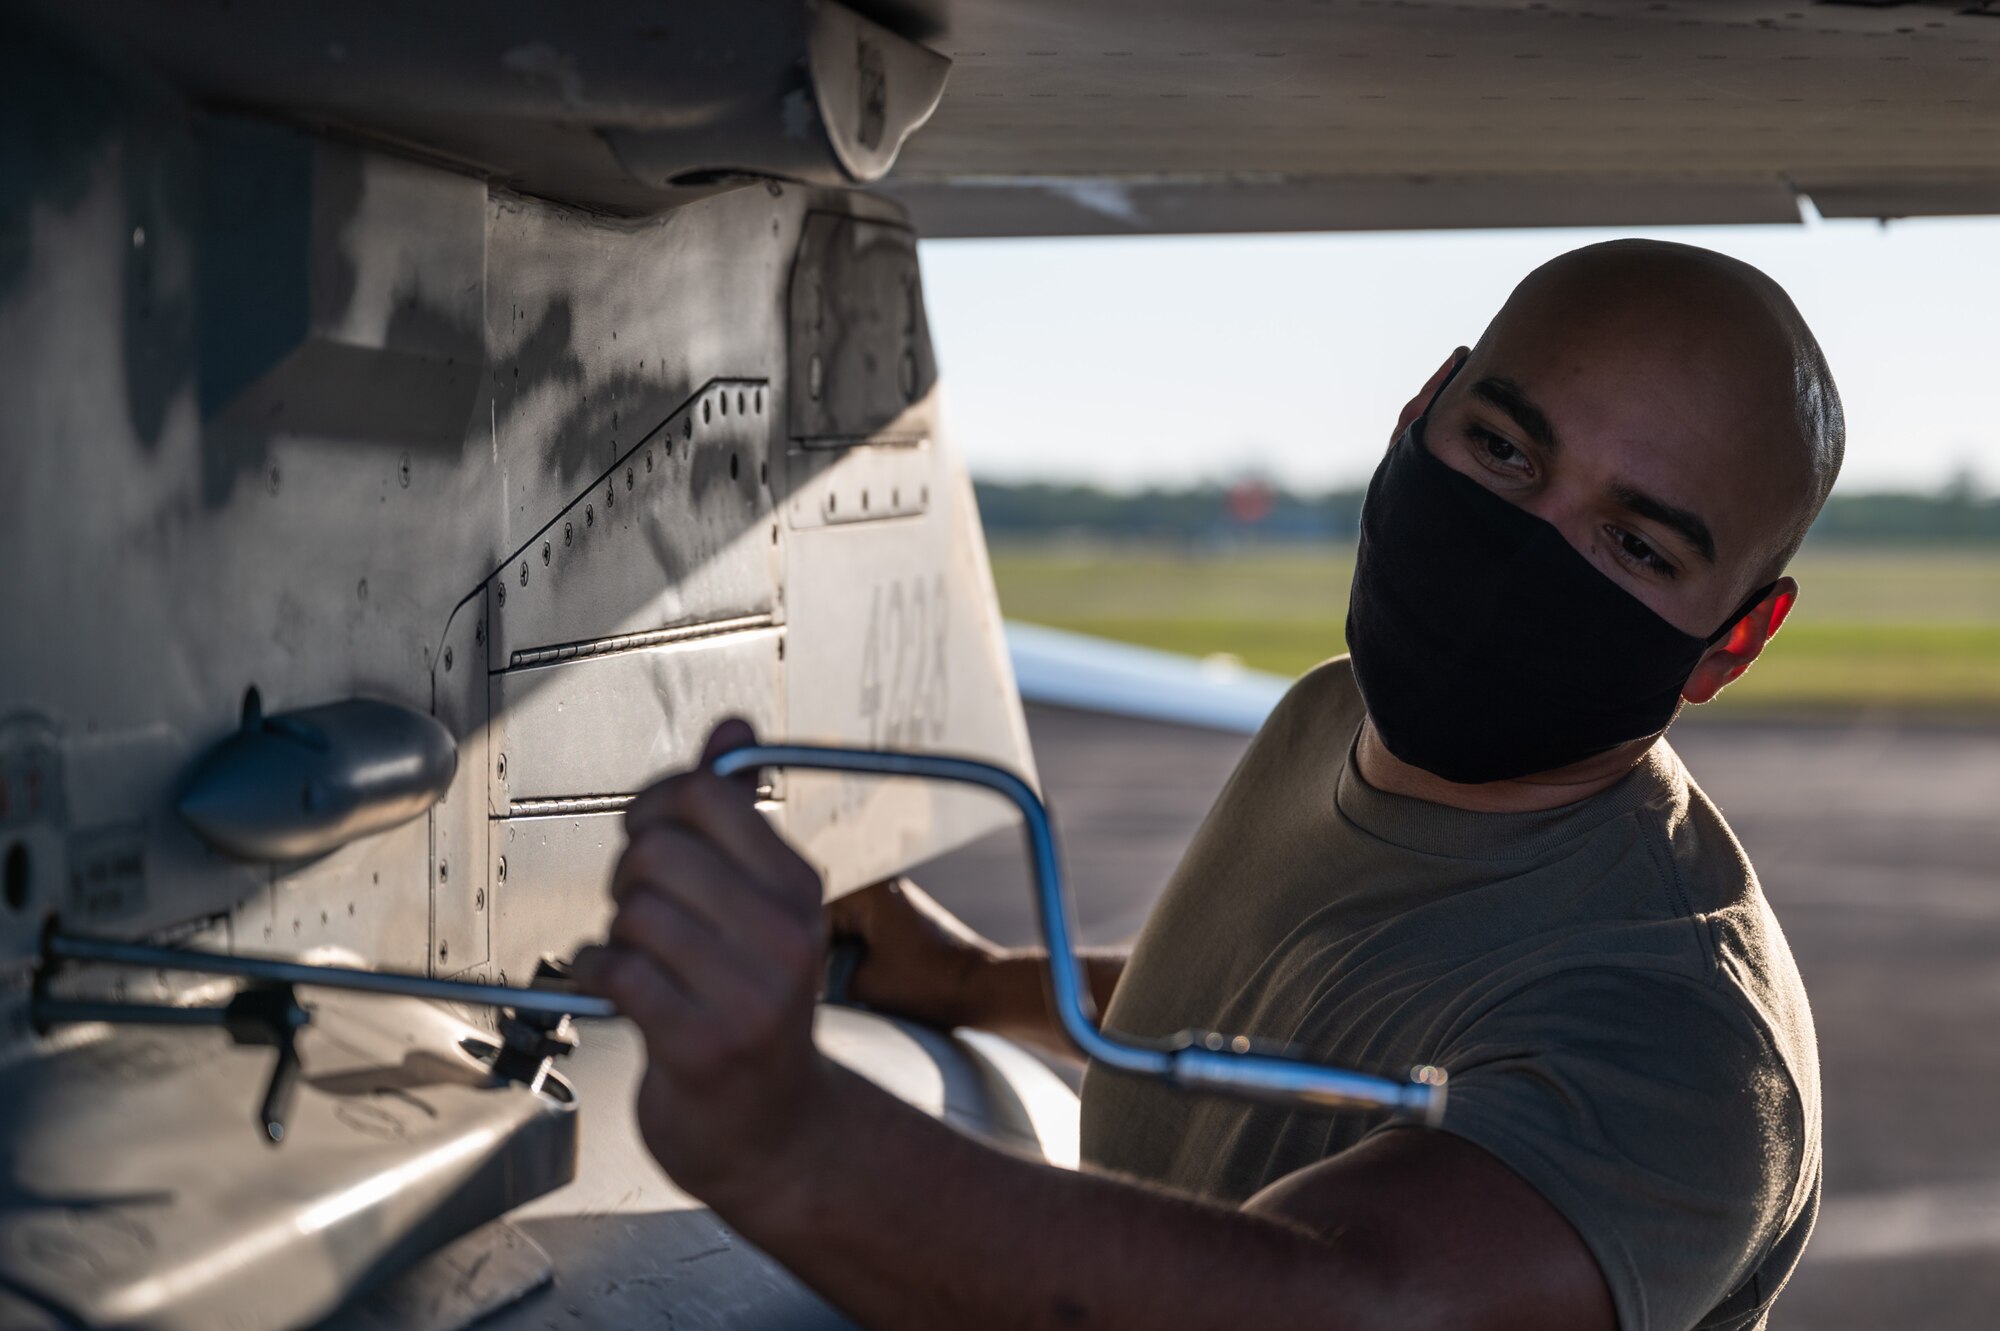 Technical Sgt. Chad Wright of the 162nd Wing, Arizona Air National Guard, performs maintenance on an F-16 fighter aircraft while deployed to Naval Air Station Joint Reserve 
Base New Orleans, for operation Southern Lightning Strike 2021, November 2. Southern Lightning Strike is an Air National Guard led exercise where units deploy from their home bases to forward operating bases with minimum personnel and equipment to accomplish the mission in austere conditions. (U.S. Air National Guard Photo by Technical Sgt. H. Edward Stramler)